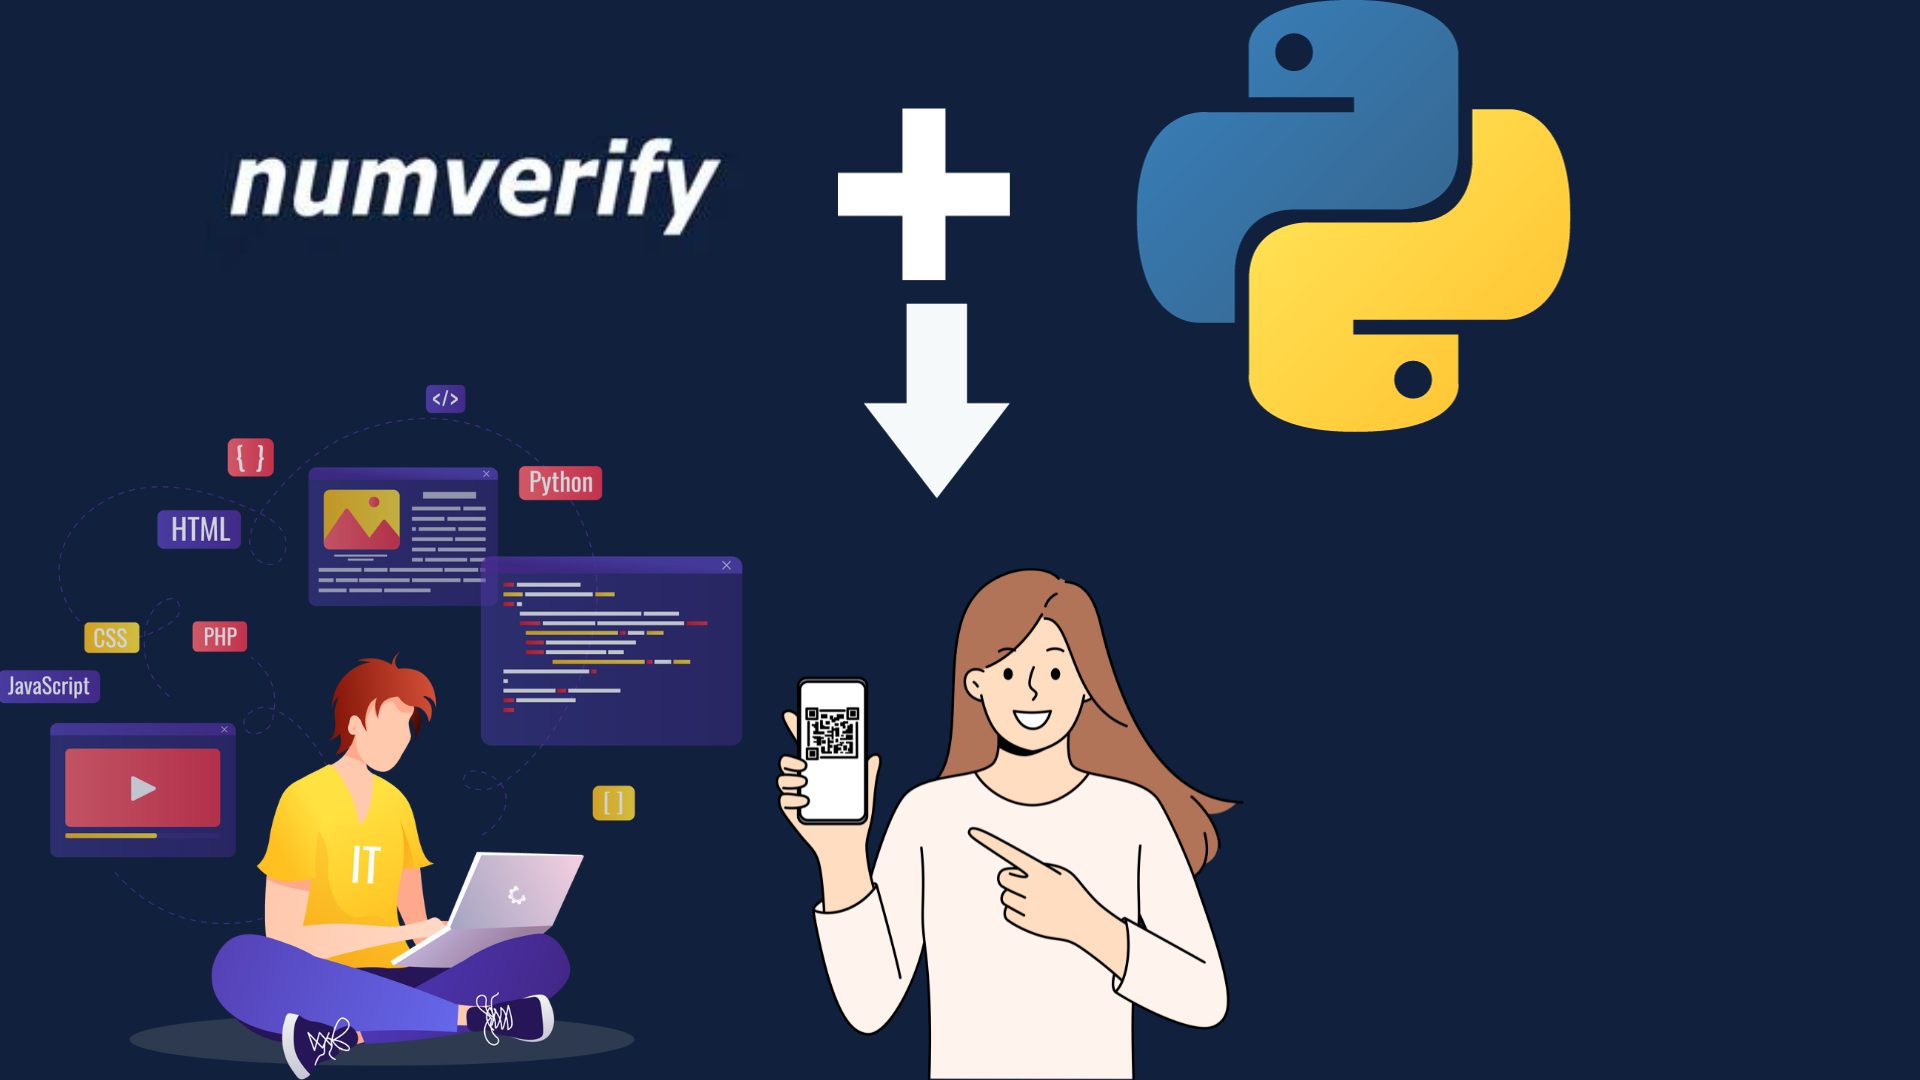 This image displays a visual representation of integrating Numverify with Python for phone number validation. It features the Numverify logo paired with a Python icon, connected by a downward arrow to a smiling person holding up a smartphone with a QR code, indicating a successful validation process. Surrounding elements include programming language icons and a developer working on a laptop, emphasizing the technical background of phone number validation services.